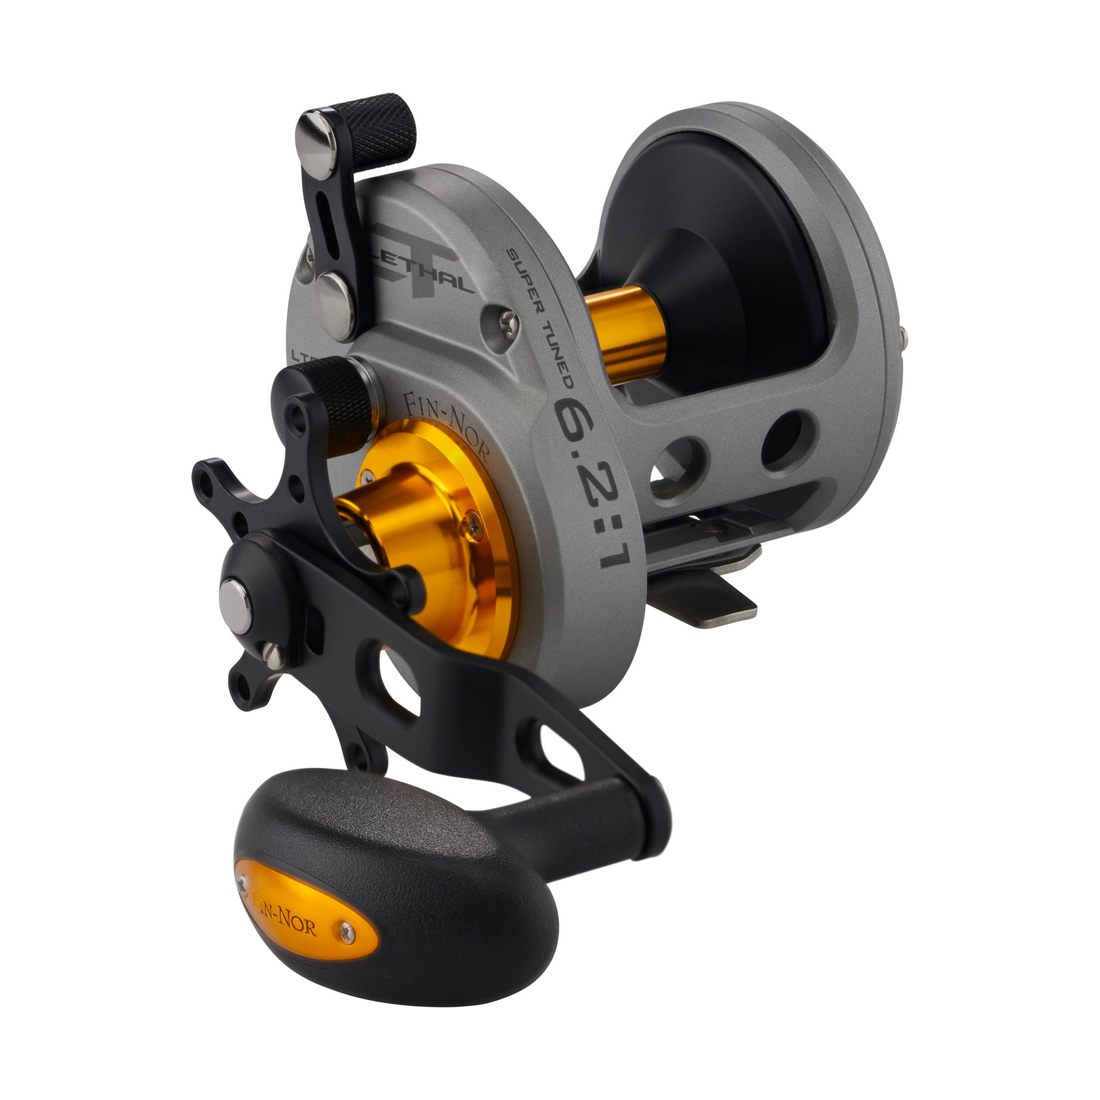 Fin-Nor Lethal LTC16 Overhead Reel End of Financial Year for sale online